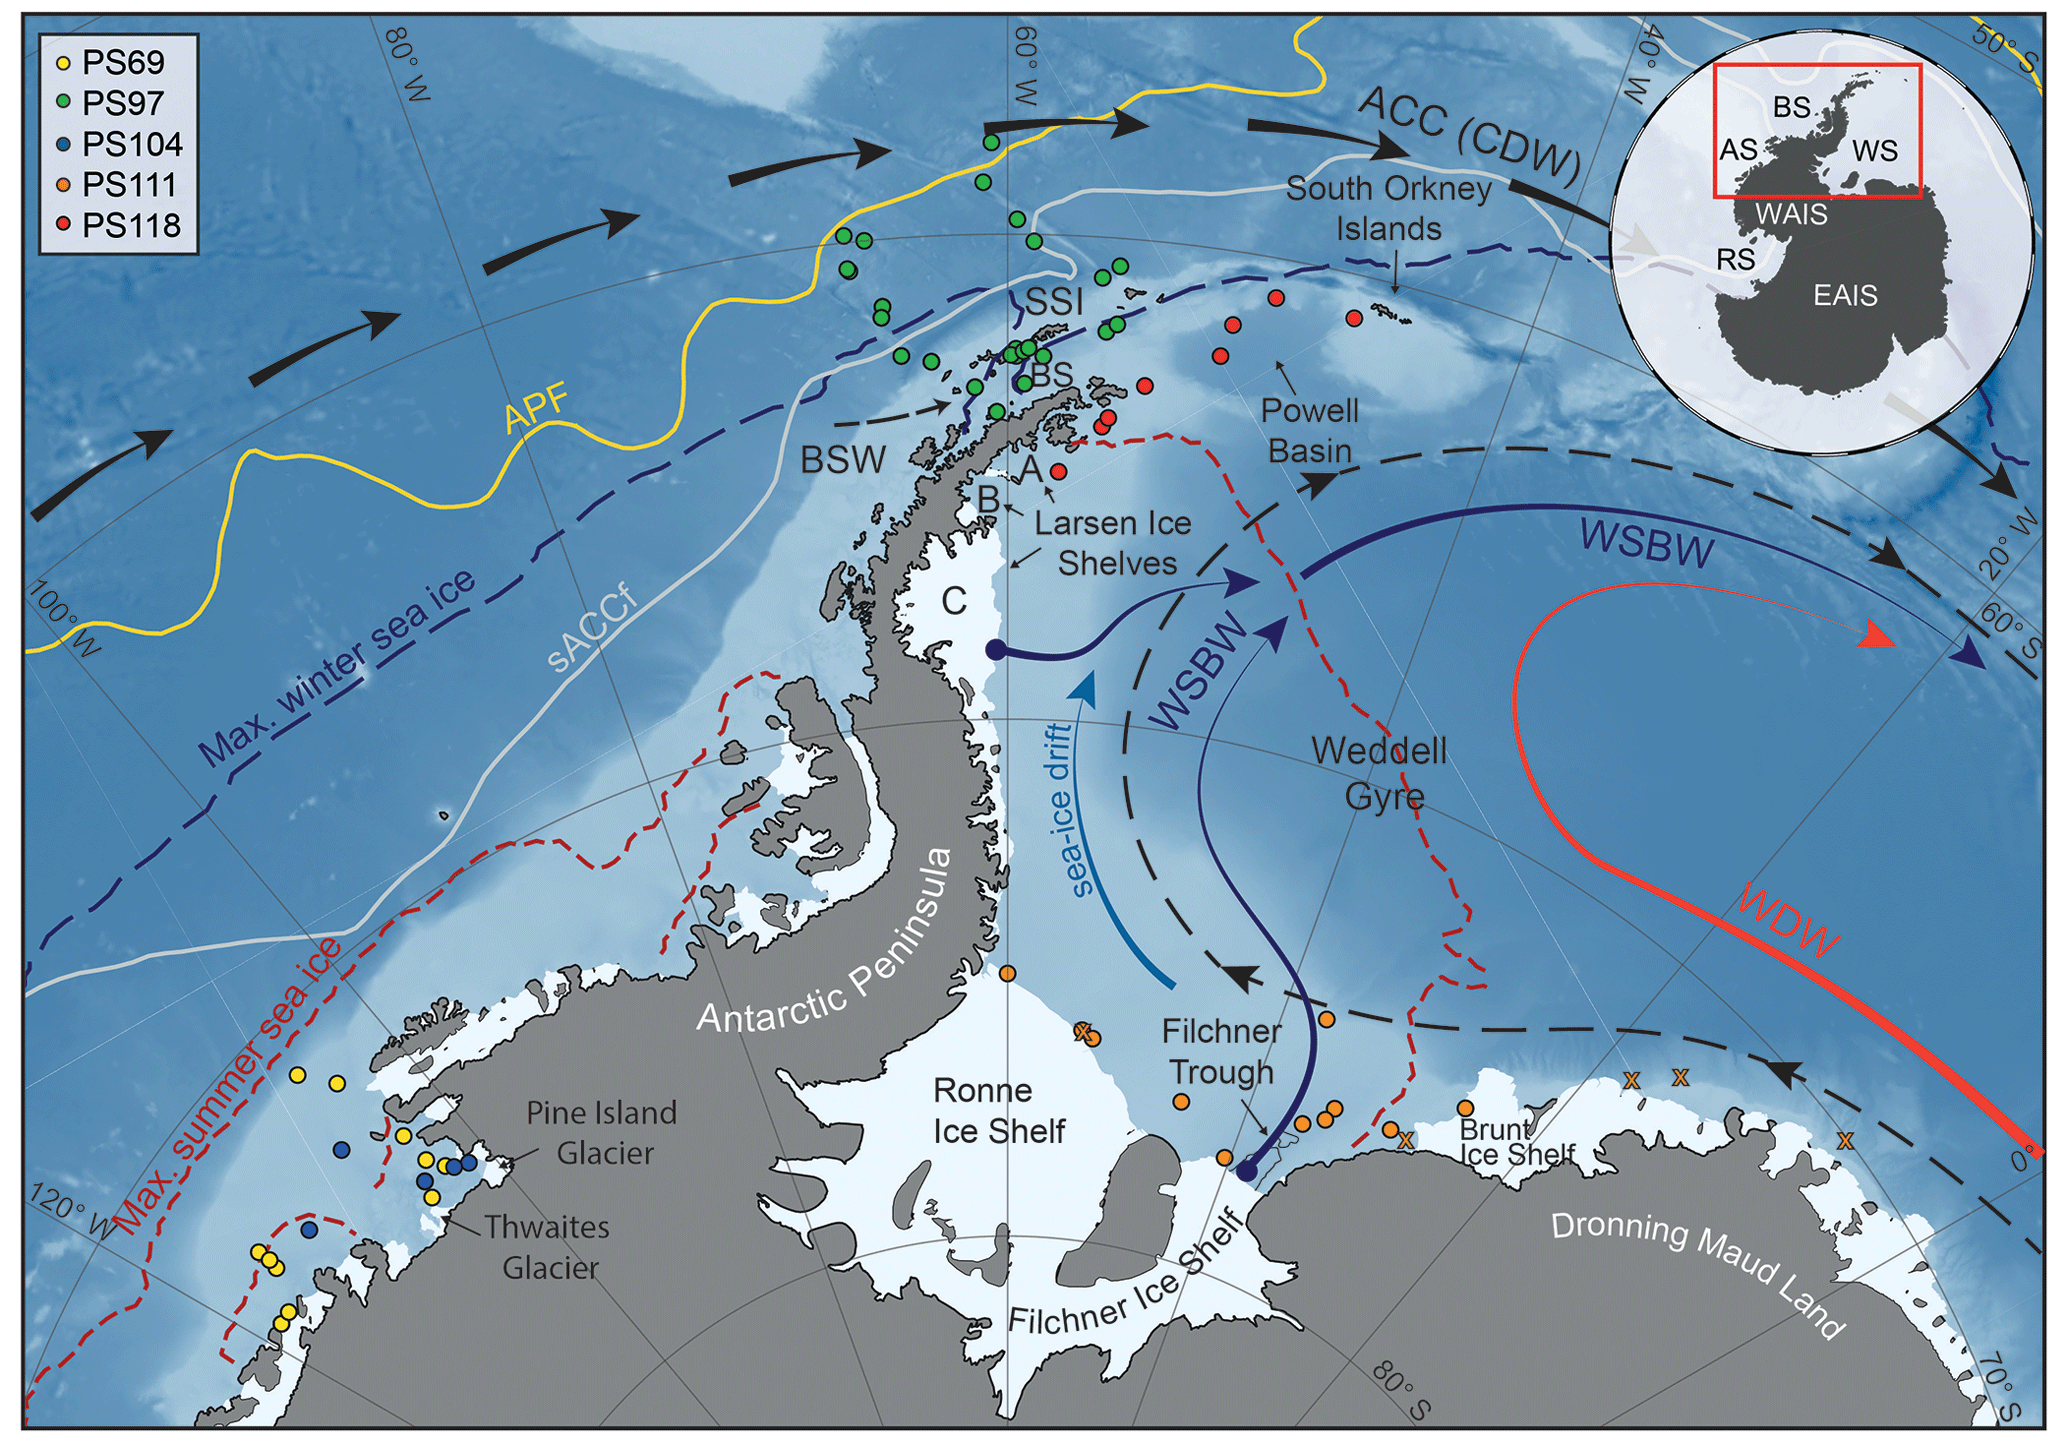 biomarkers Antarctic margin along CP and the for Evaluation ice temperatures ocean as sea continental - lipid proxies of